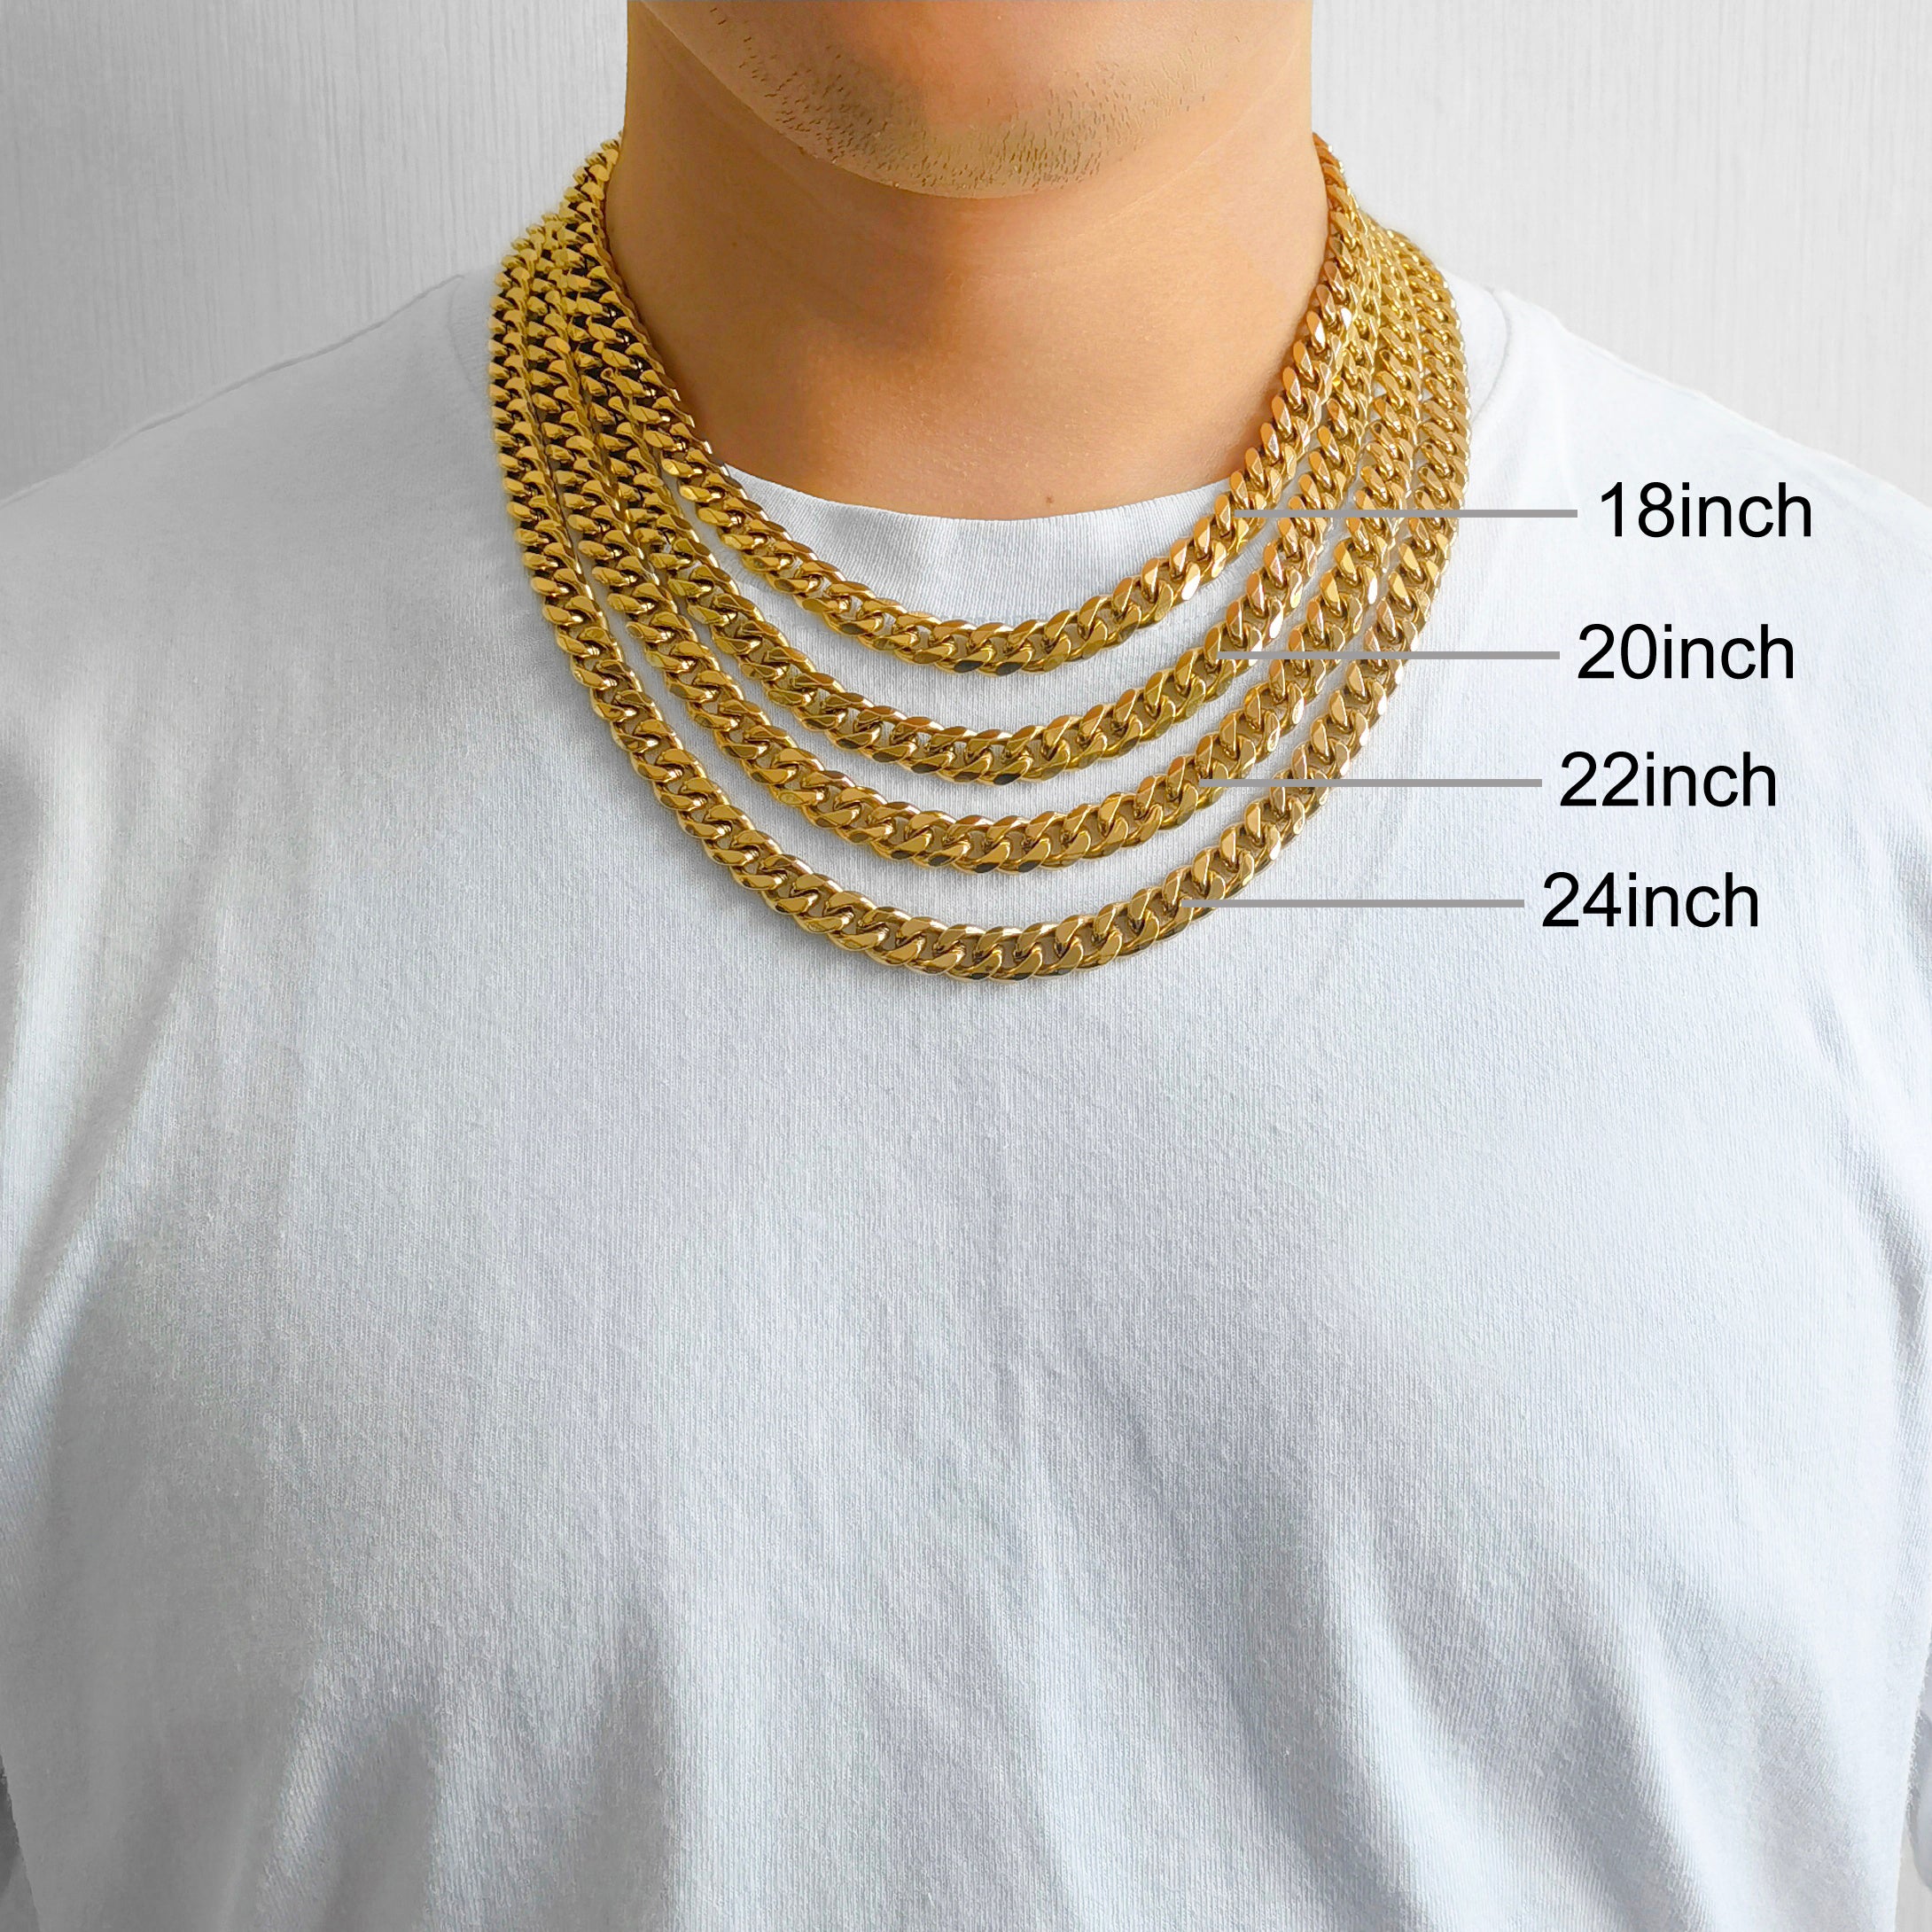 Men's 9mm Gold Plated Steel 18-24 Inch Curb Chain Necklace